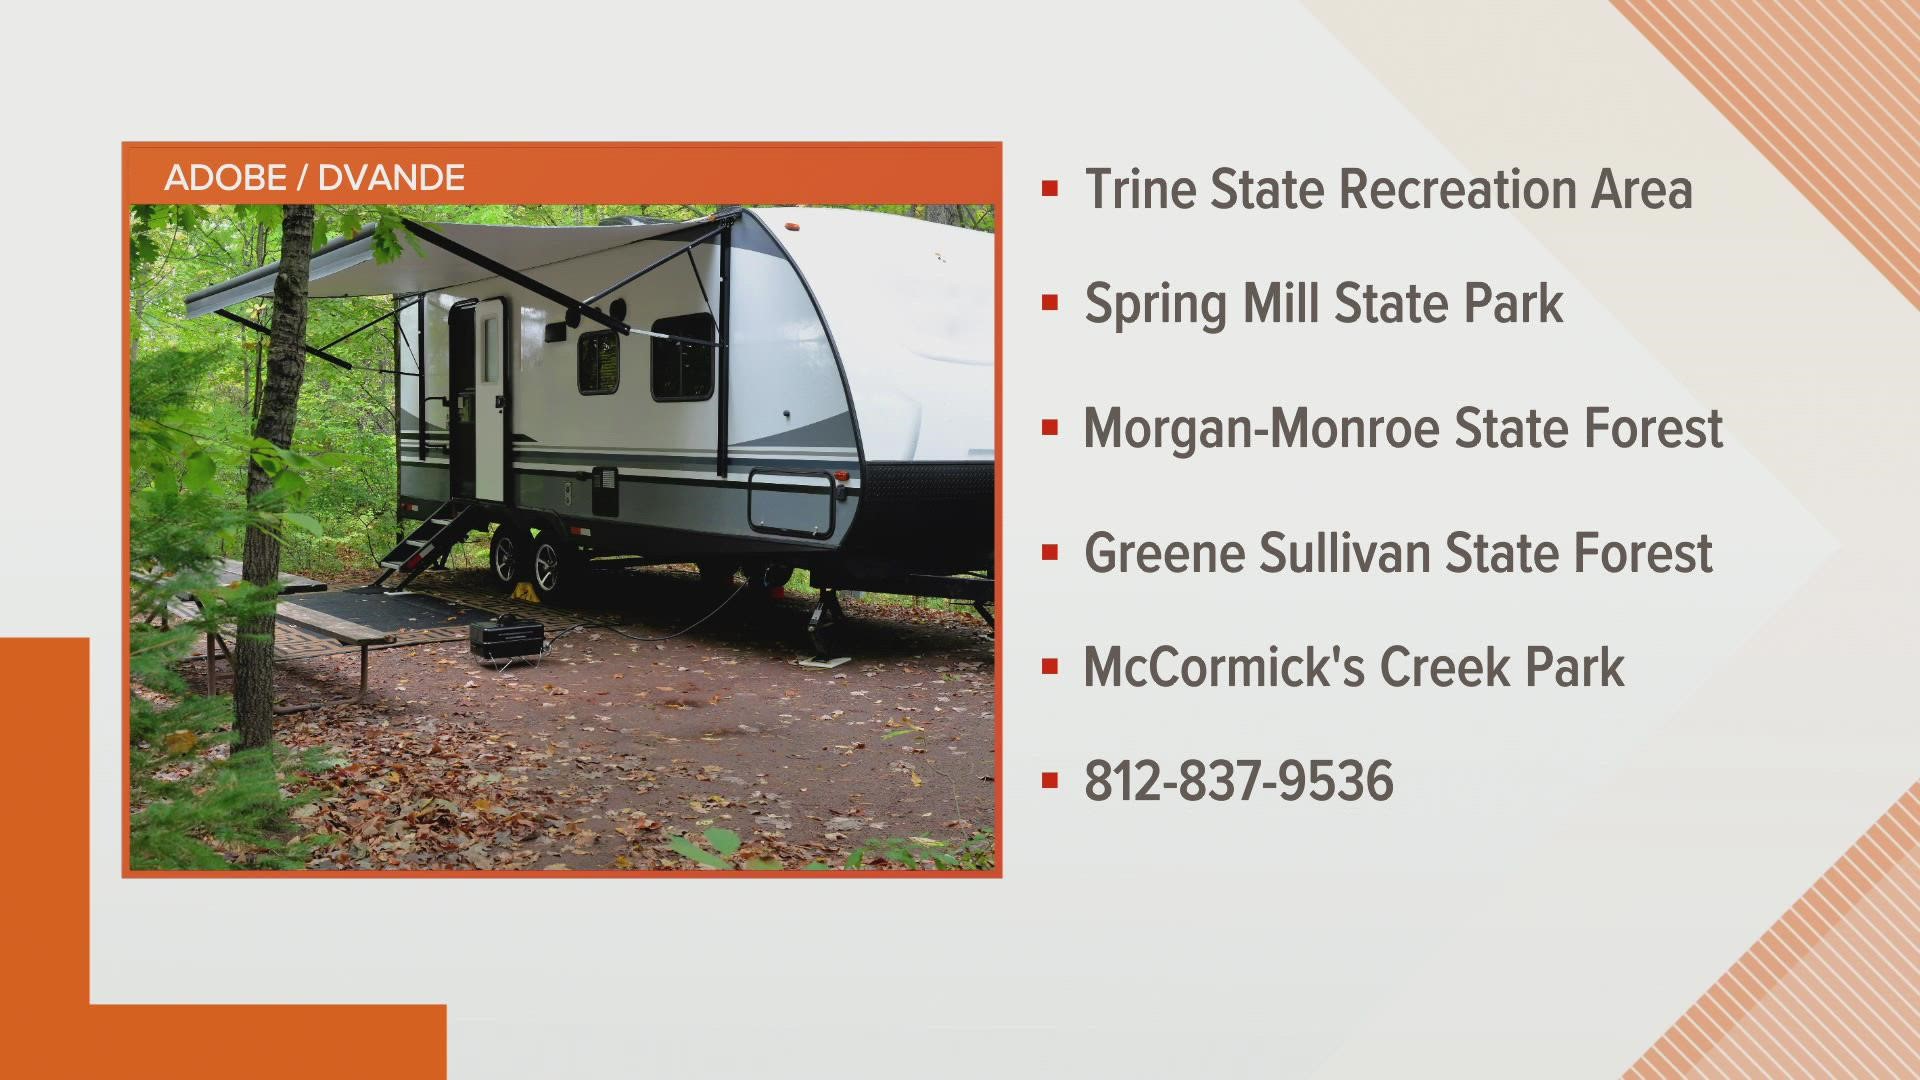 Investigators said the scam involved campsite reservations at several Indiana State Parks.